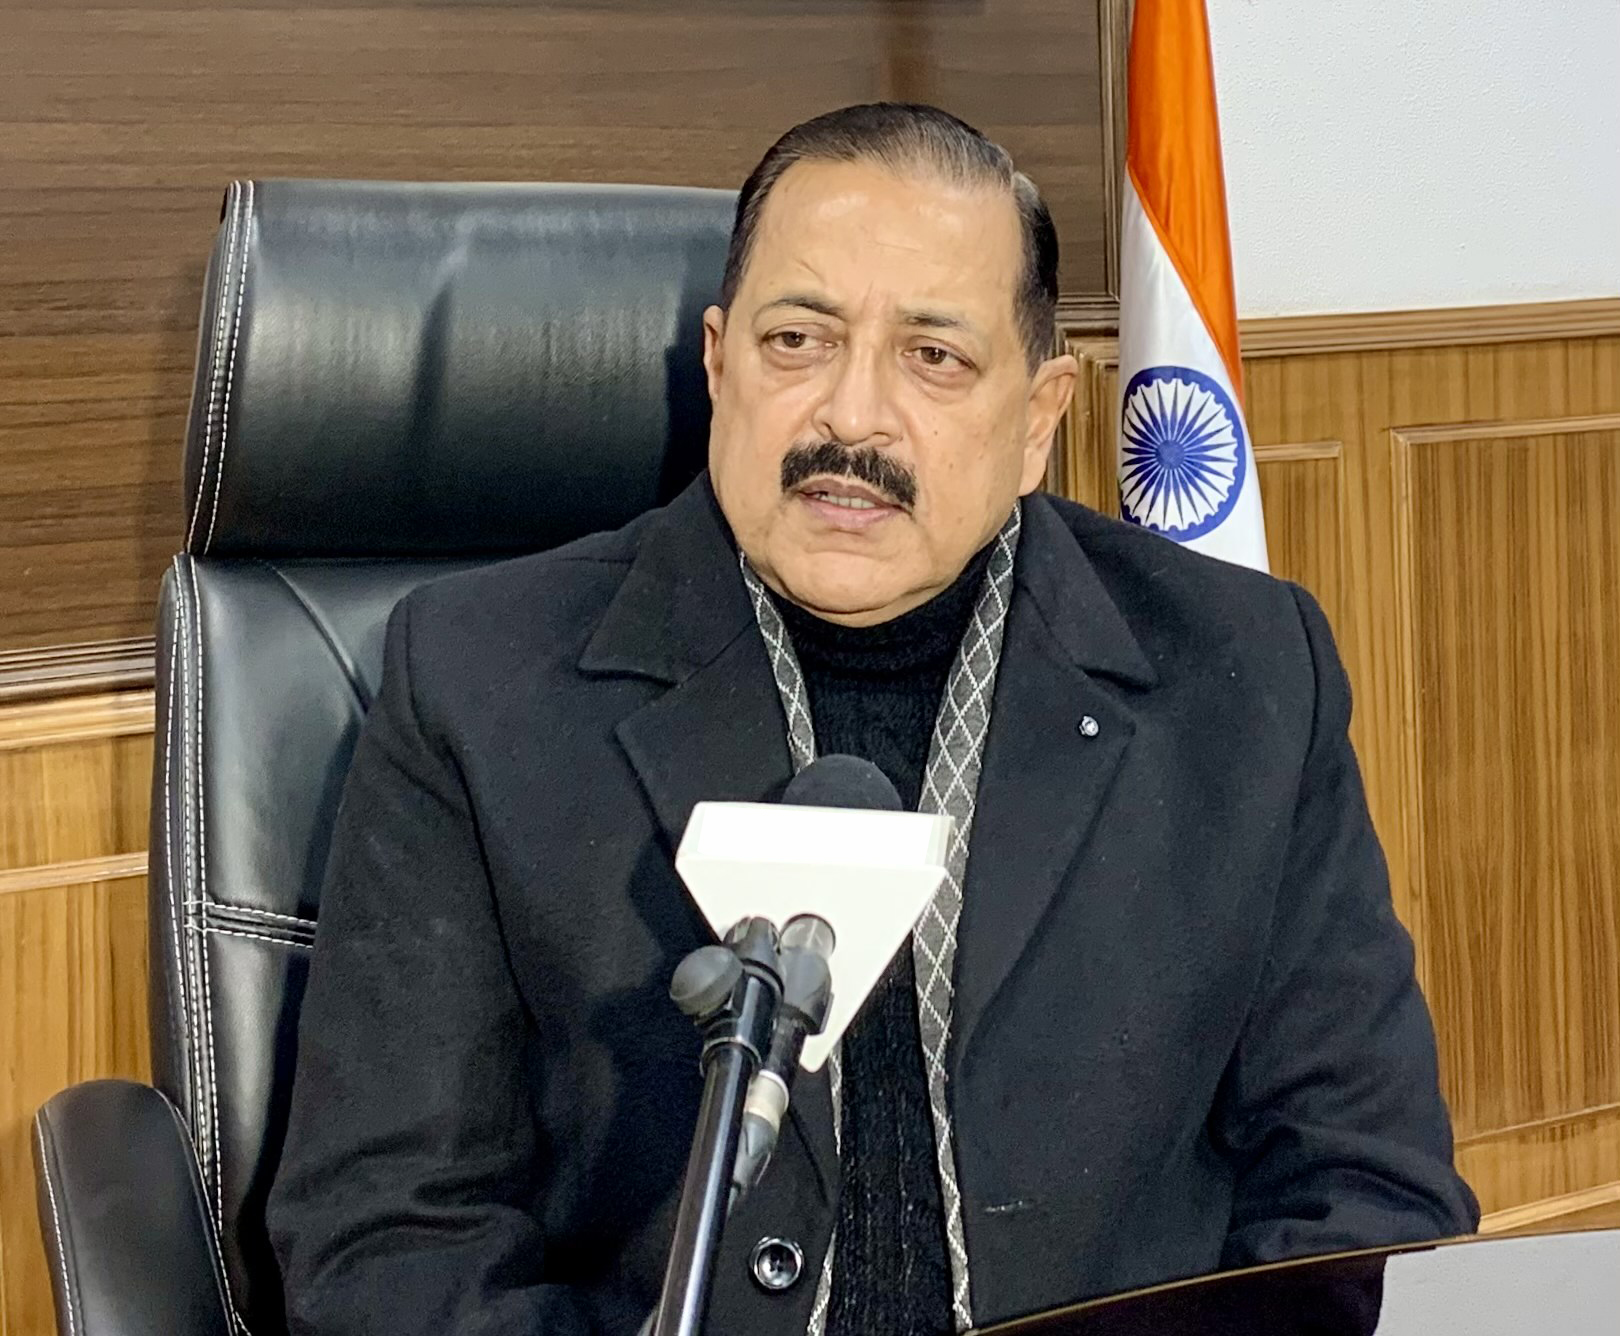 ISRO in collaboration with private sector will boost “Atmanirbhar Bharat”: Dr Jitendra Singh